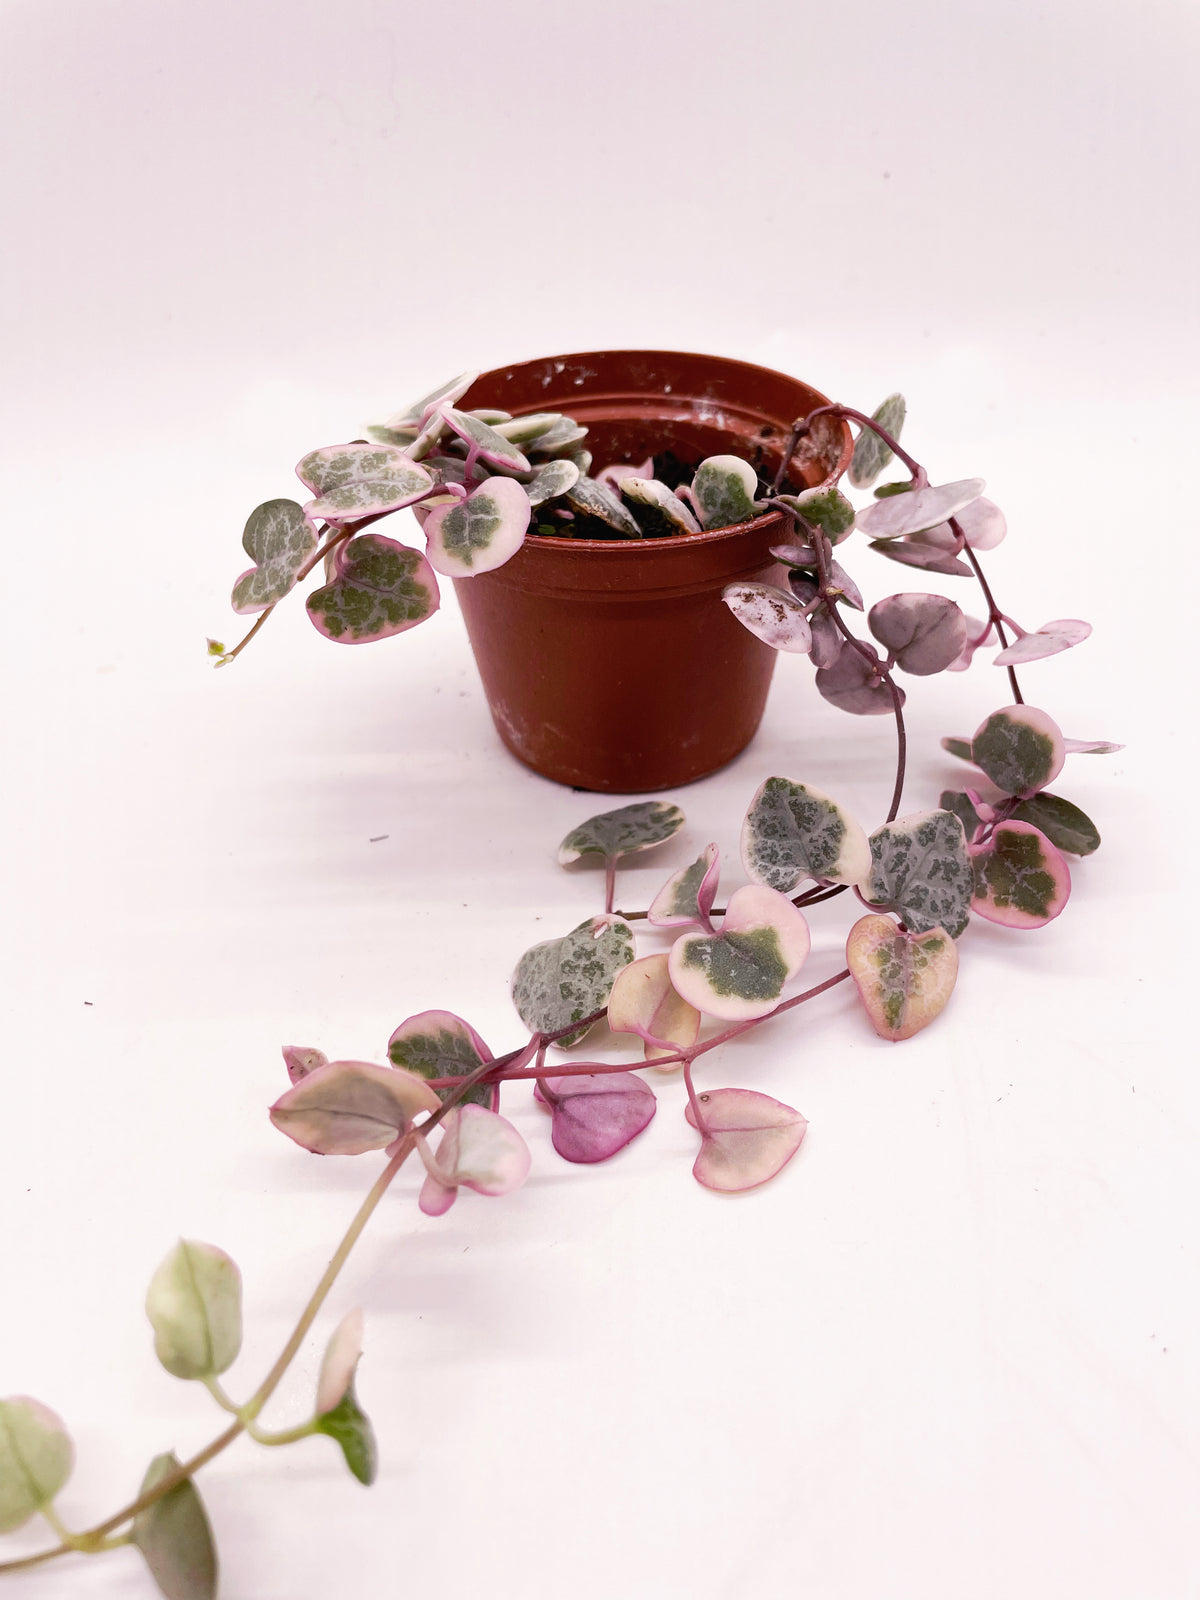 Variegated string of hearts